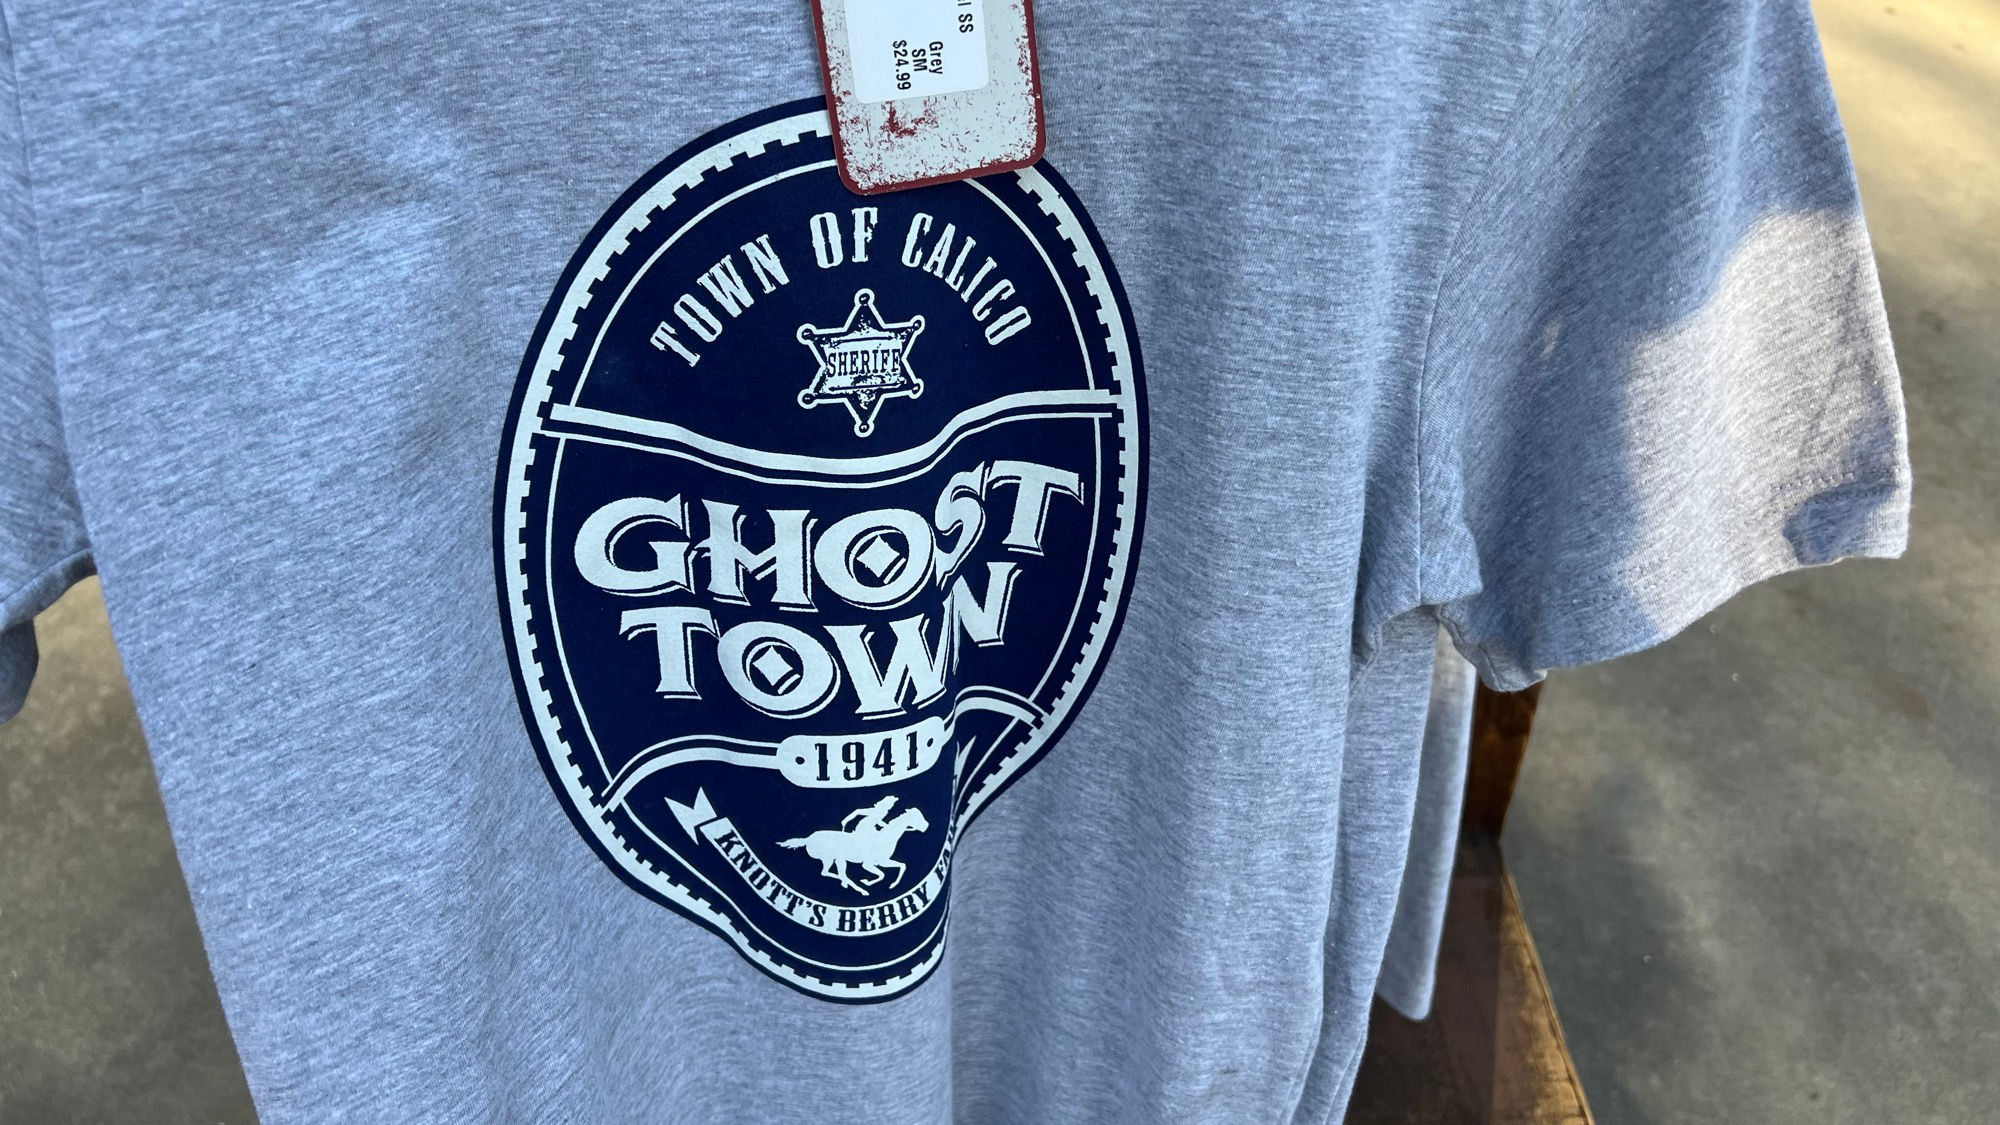 Ghost Town T-Shirt